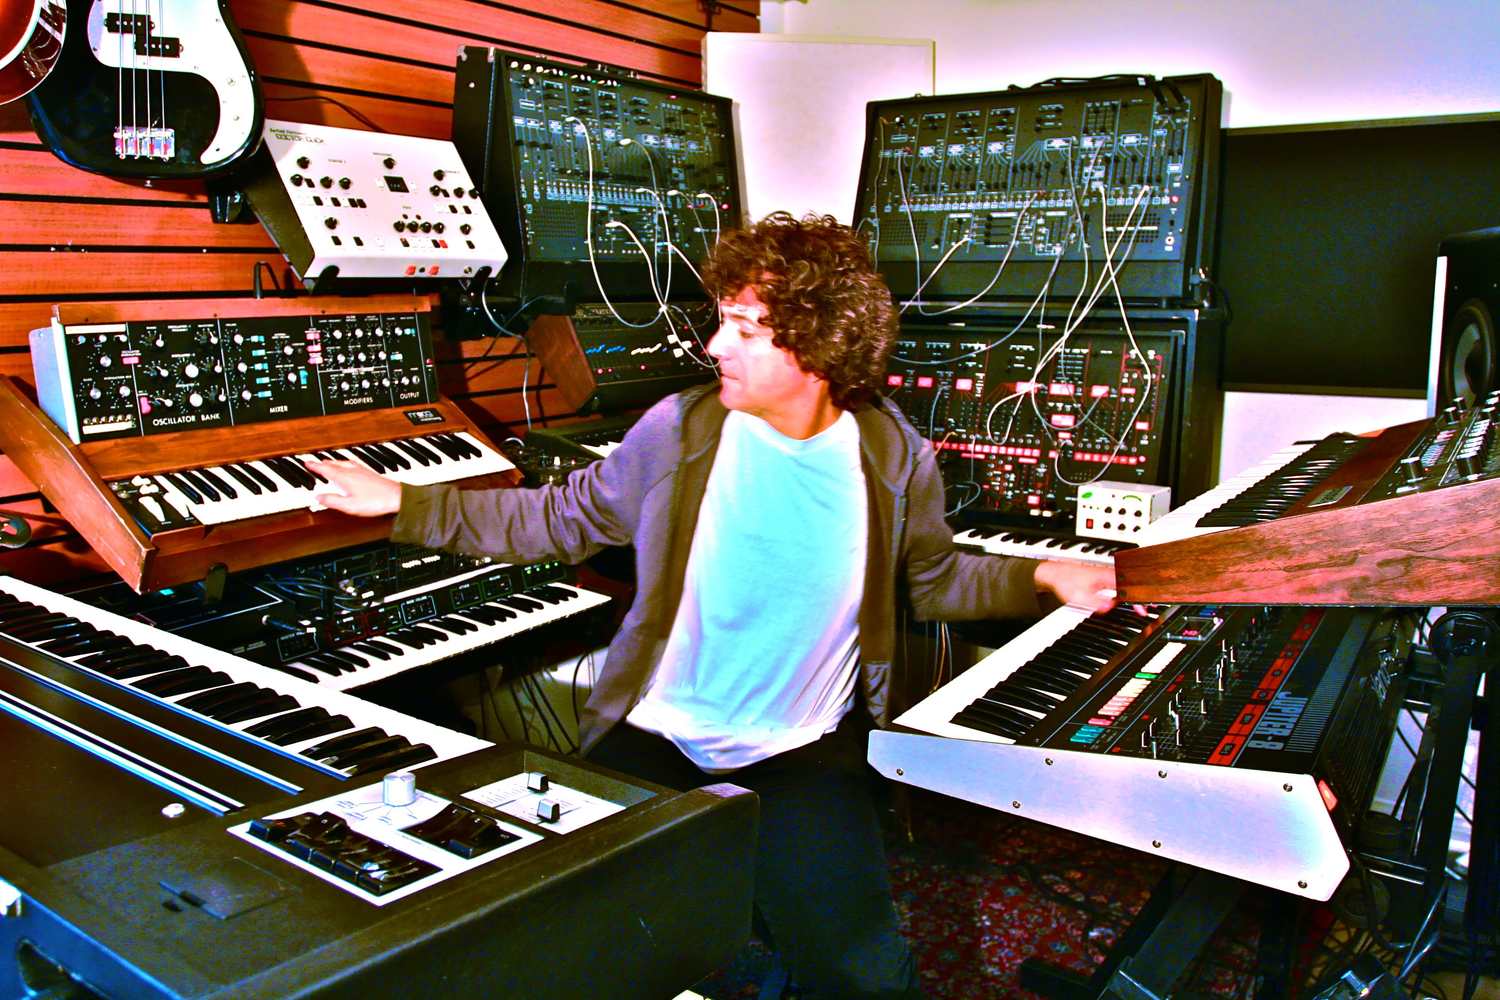  Anthony Marinelli performing on some of his vintage analog synthesizers, Encino CA, 2015